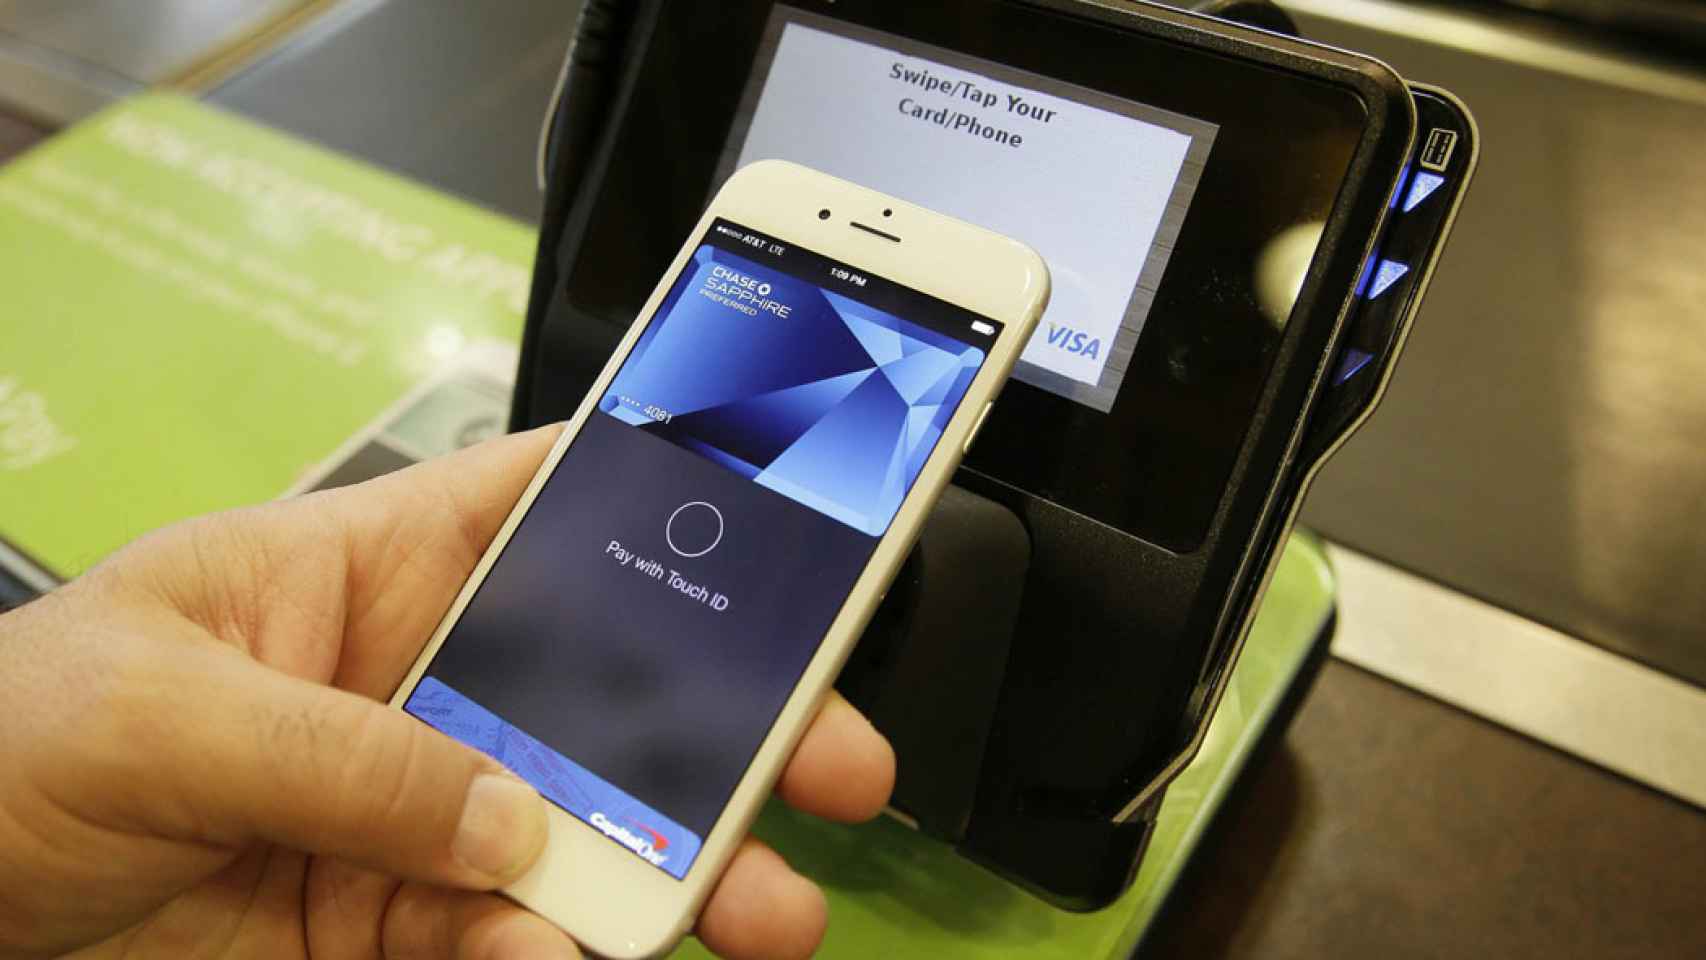 pagos moviles iphone apple pay datafono nfc